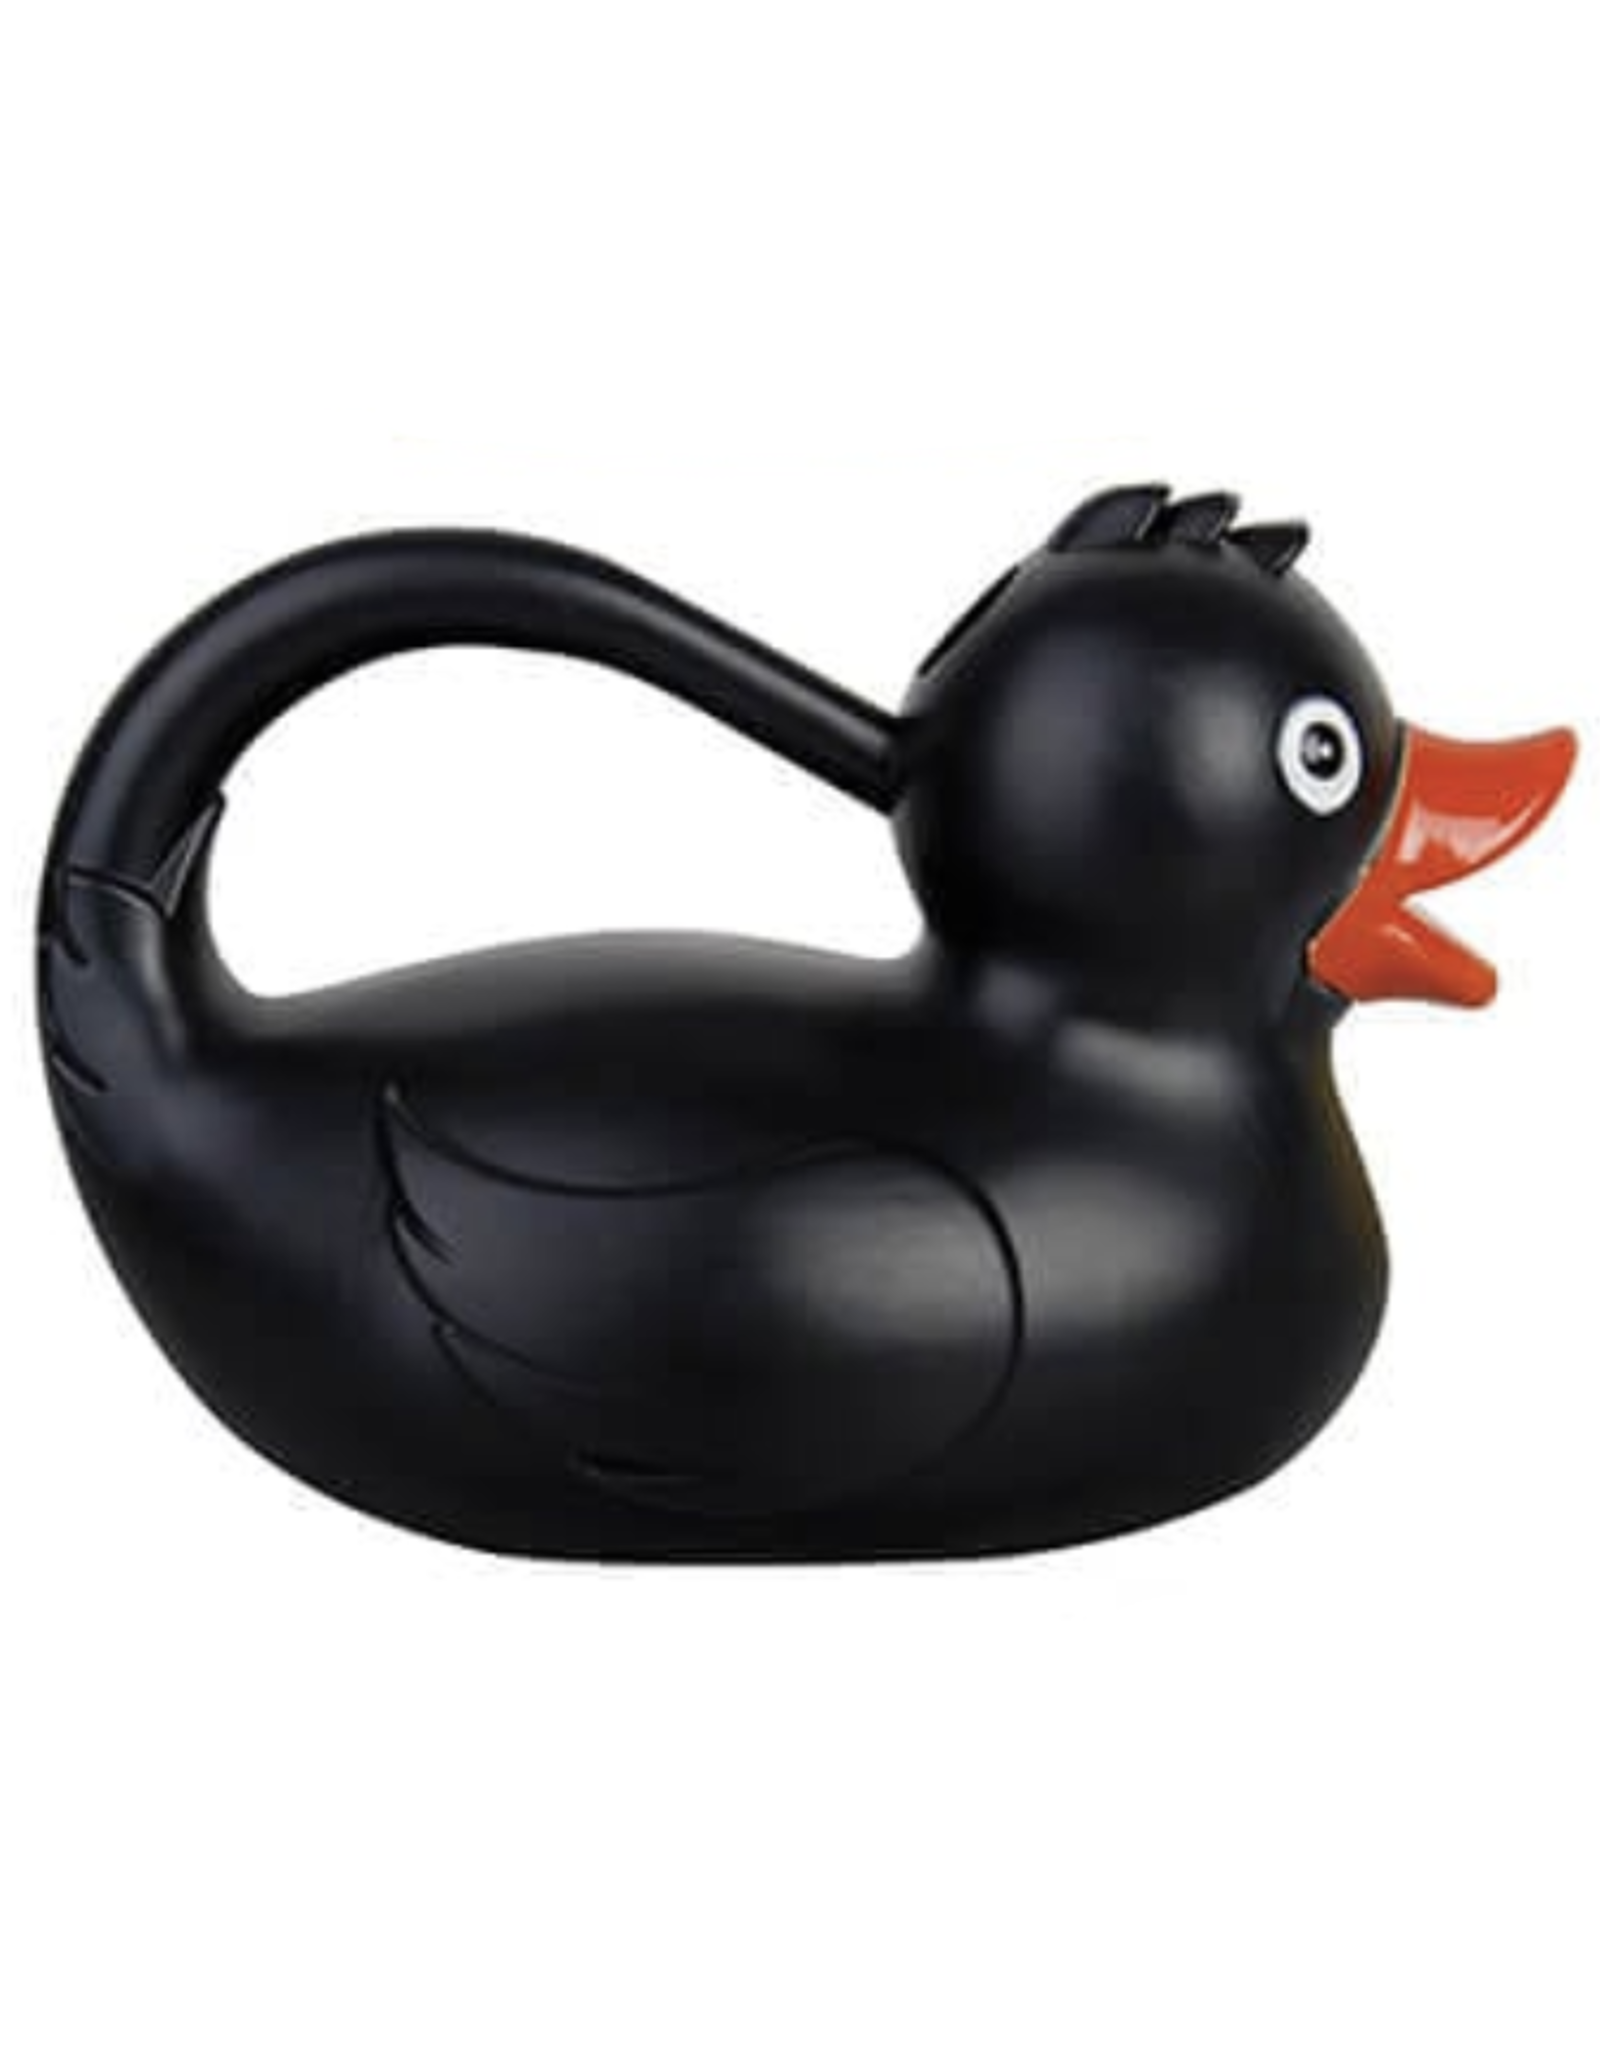 Black Rubber Ducky Watering Can